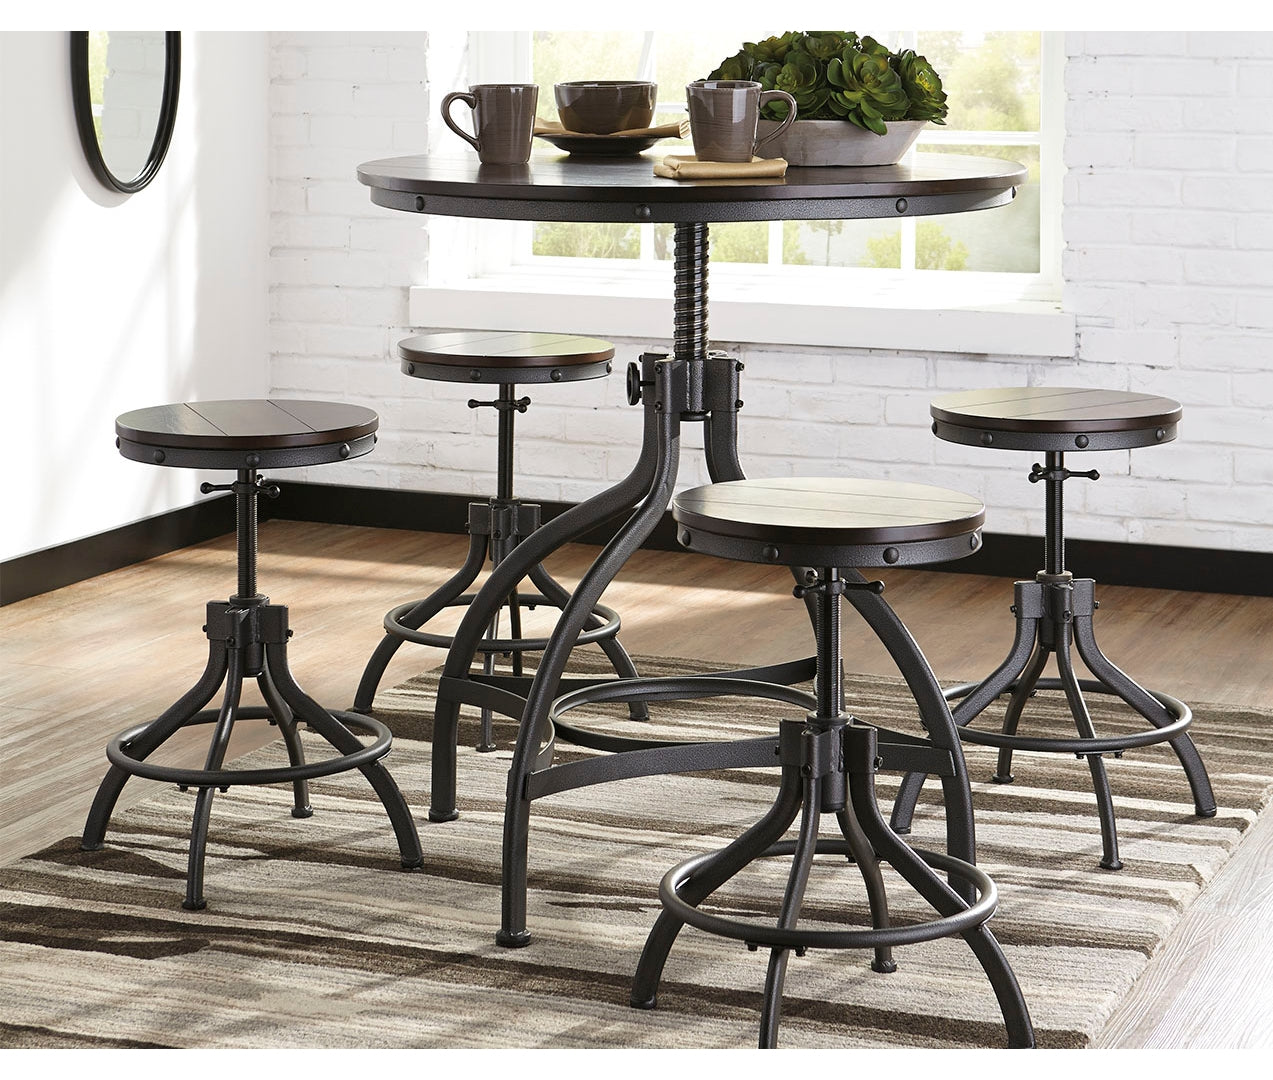 Odium Counter Height Dining Table and Bar Stools (Set of 5)